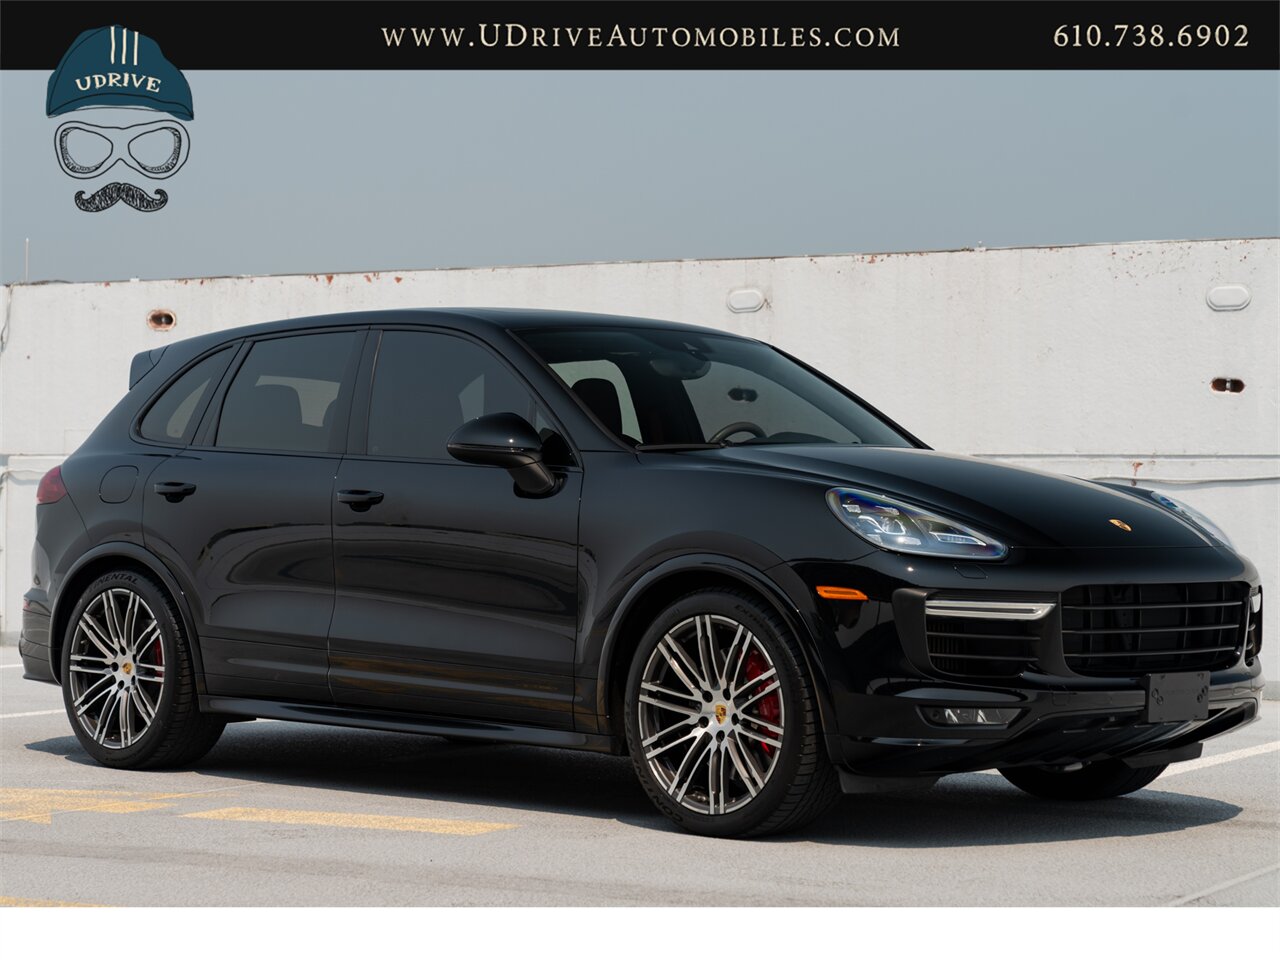 2016 Porsche Cayenne GTS  CPO Warranty 21in Whls Sport Chrono Red Dial Alcantara Red Belts Pano - Photo 16 - West Chester, PA 19382